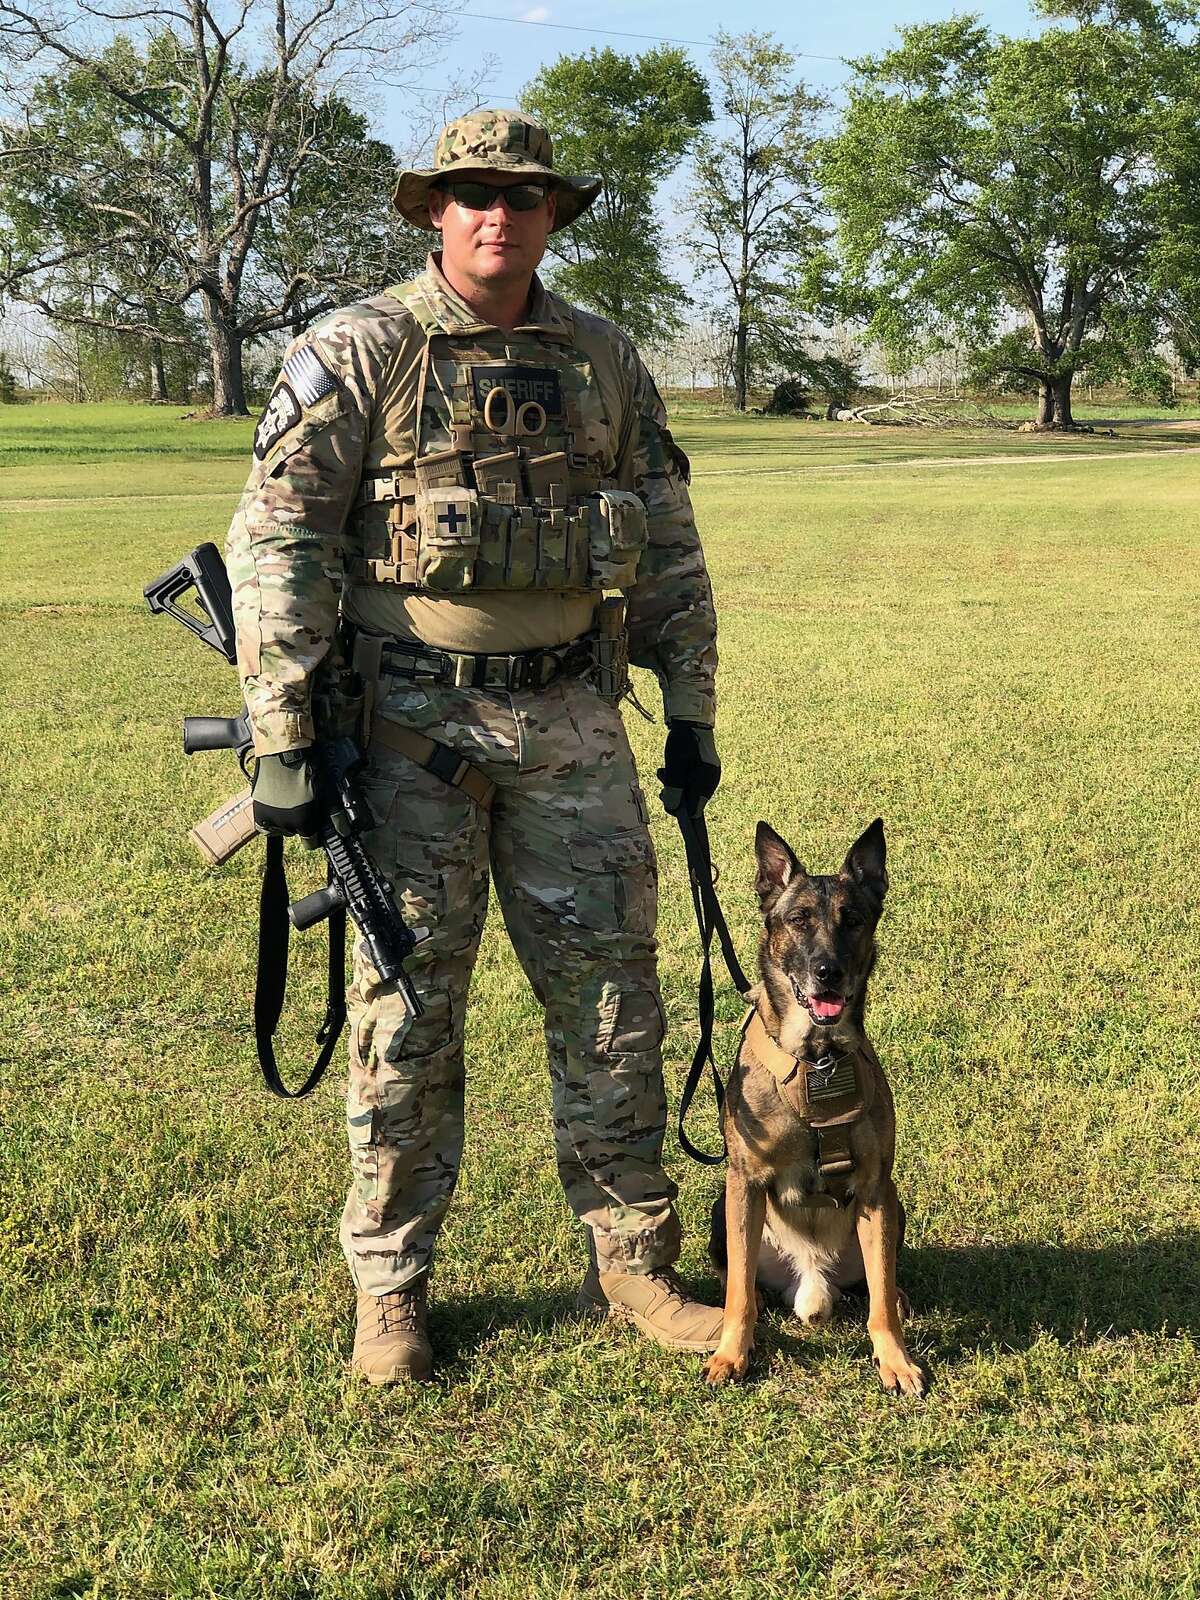 Former A's catcher Rob Bowen works with K9 partner Boedha, who is now retired.